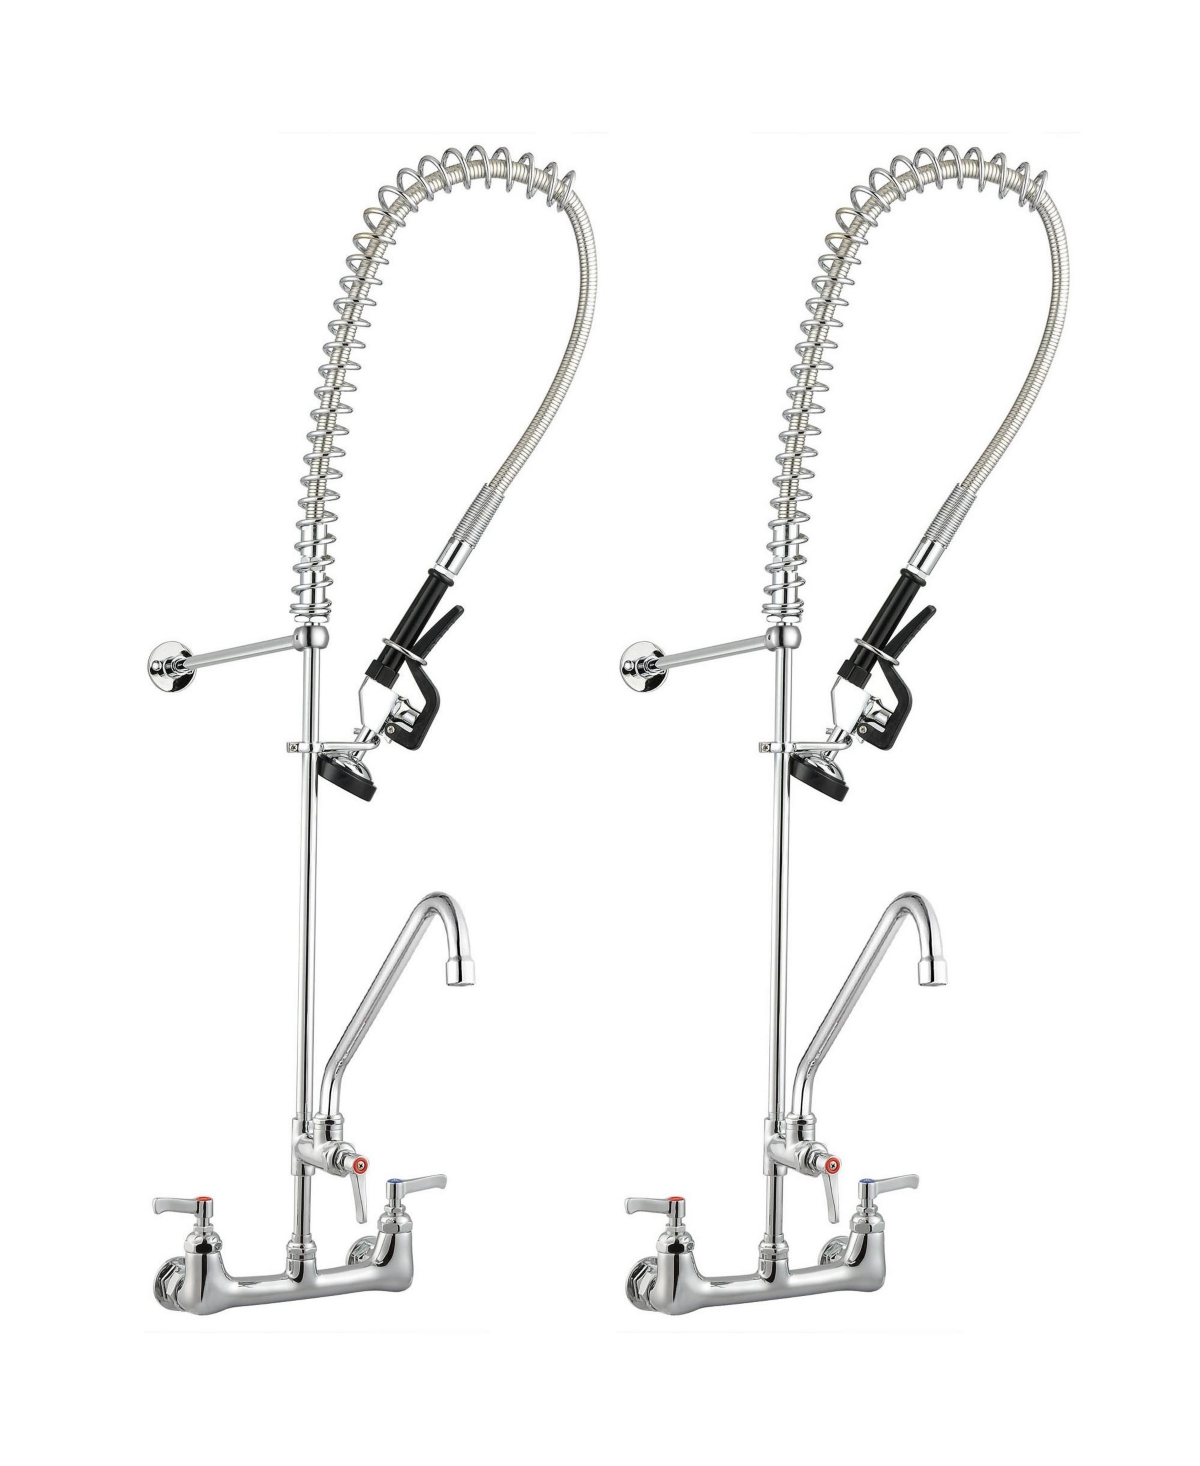 Wall Mount Commercial Faucet w/ Pre-Rinse Pull Down Sprayer 2 Pack - Assorted Pre-pack (See Table